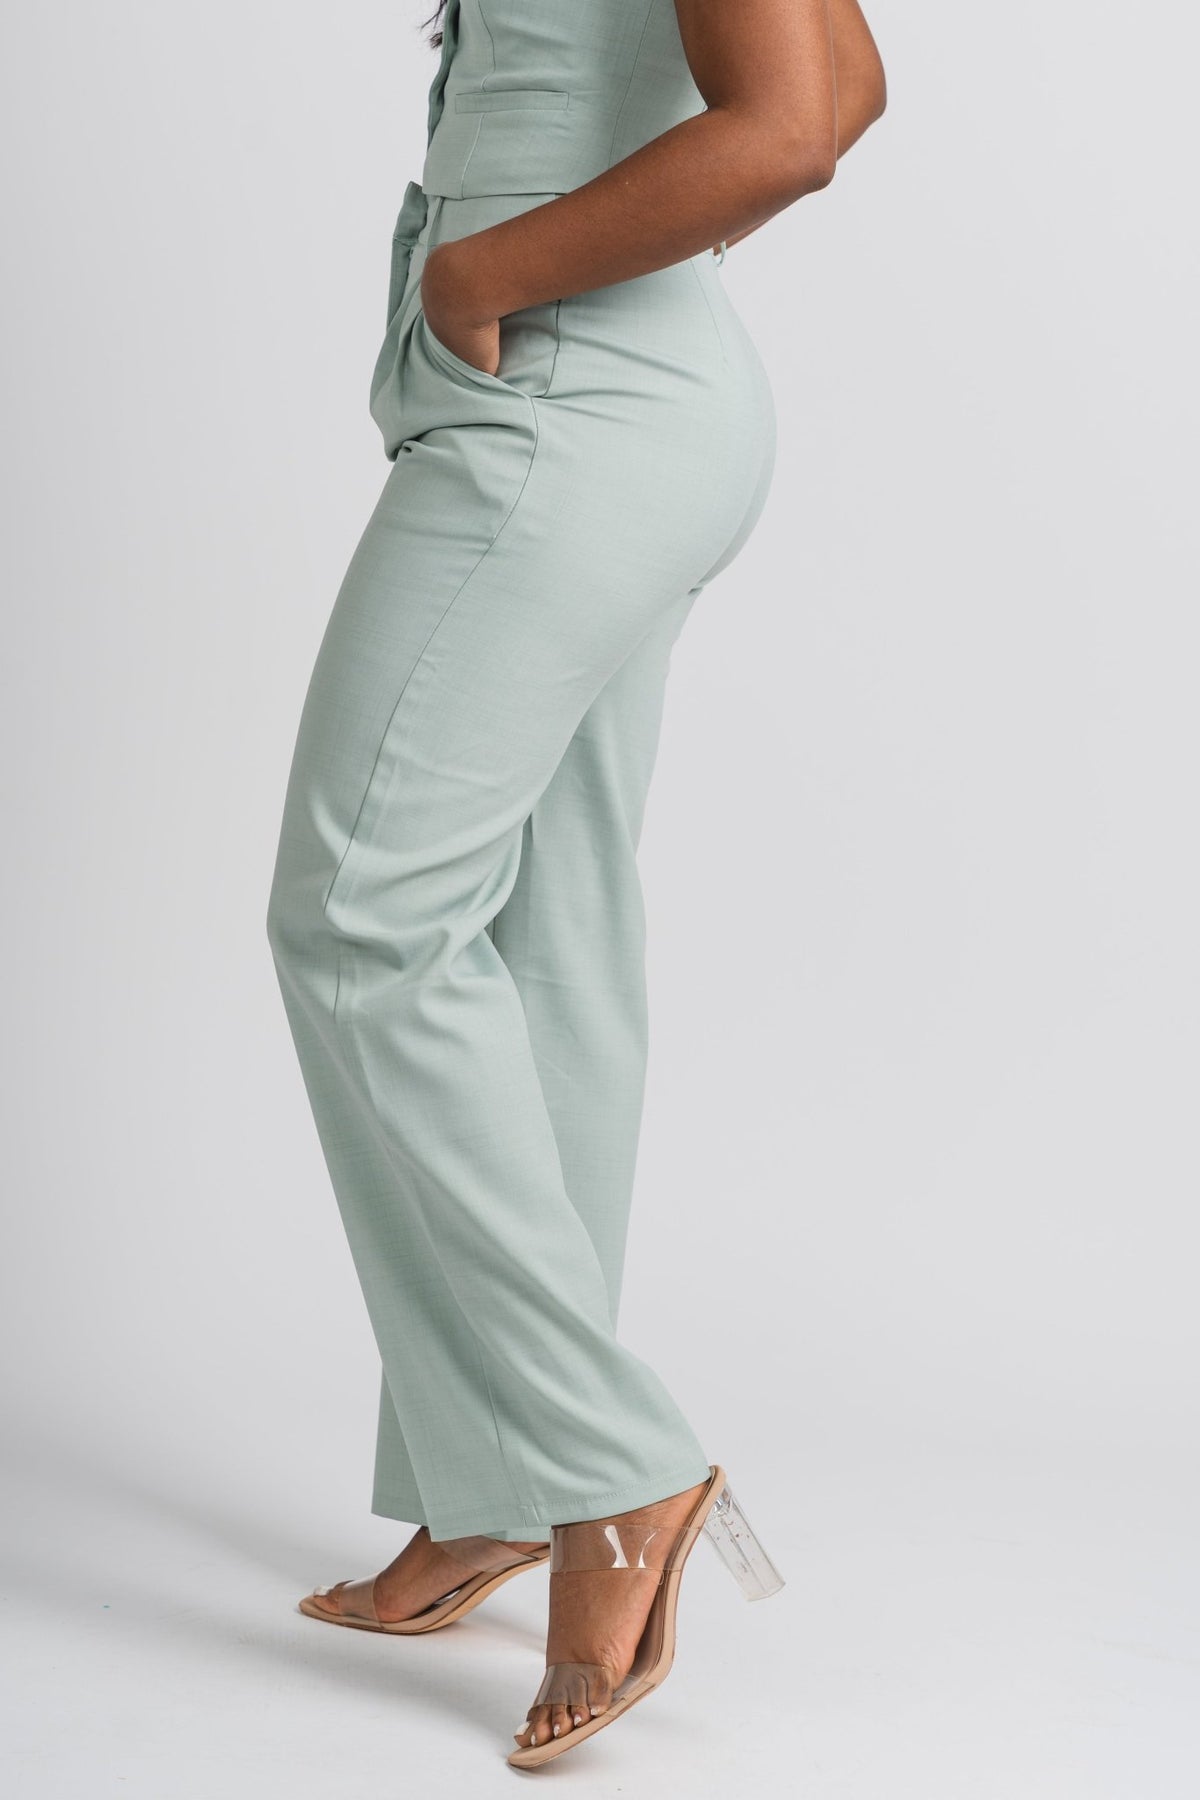 Wide leg pants sage - Stylish Pants - Cute Easter Outfits at Lush Fashion Lounge Boutique in Oklahoma